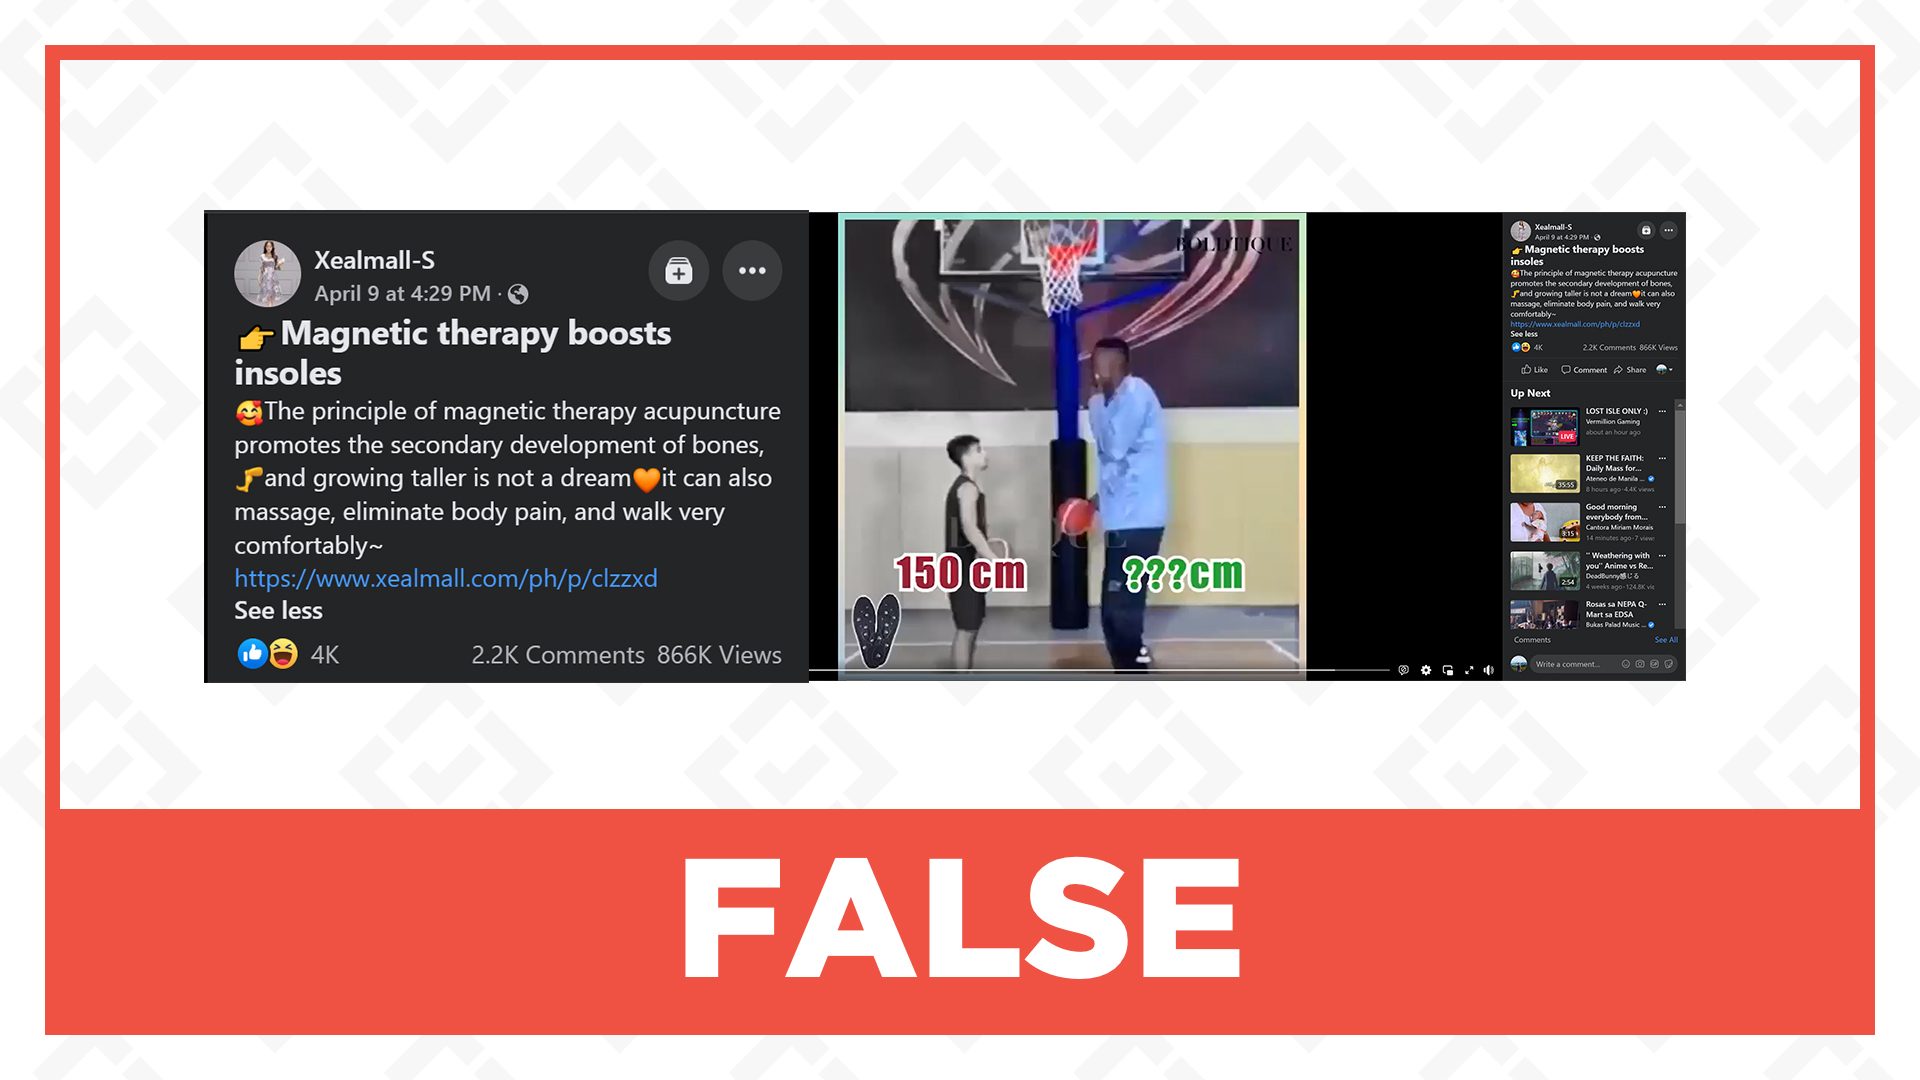 FALSE: Magnetic therapy insoles increase height